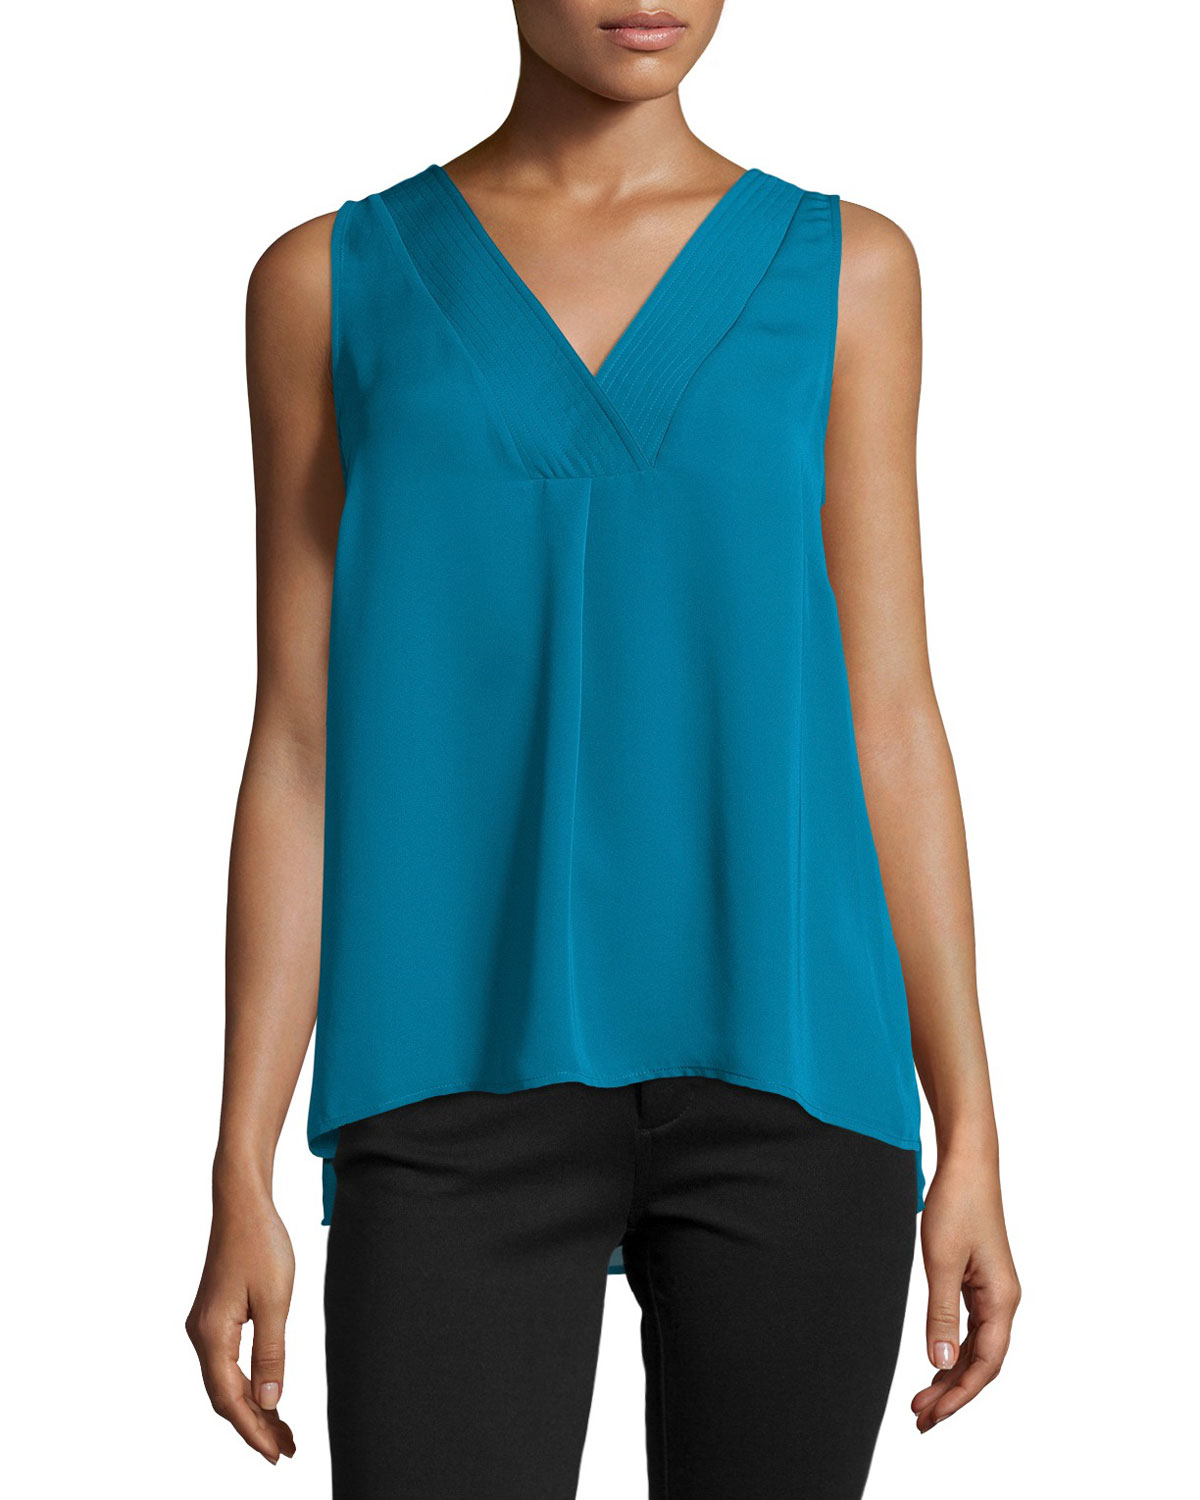 Laundry by shelli segal Sleeveless Double-layer Top in Black | Lyst